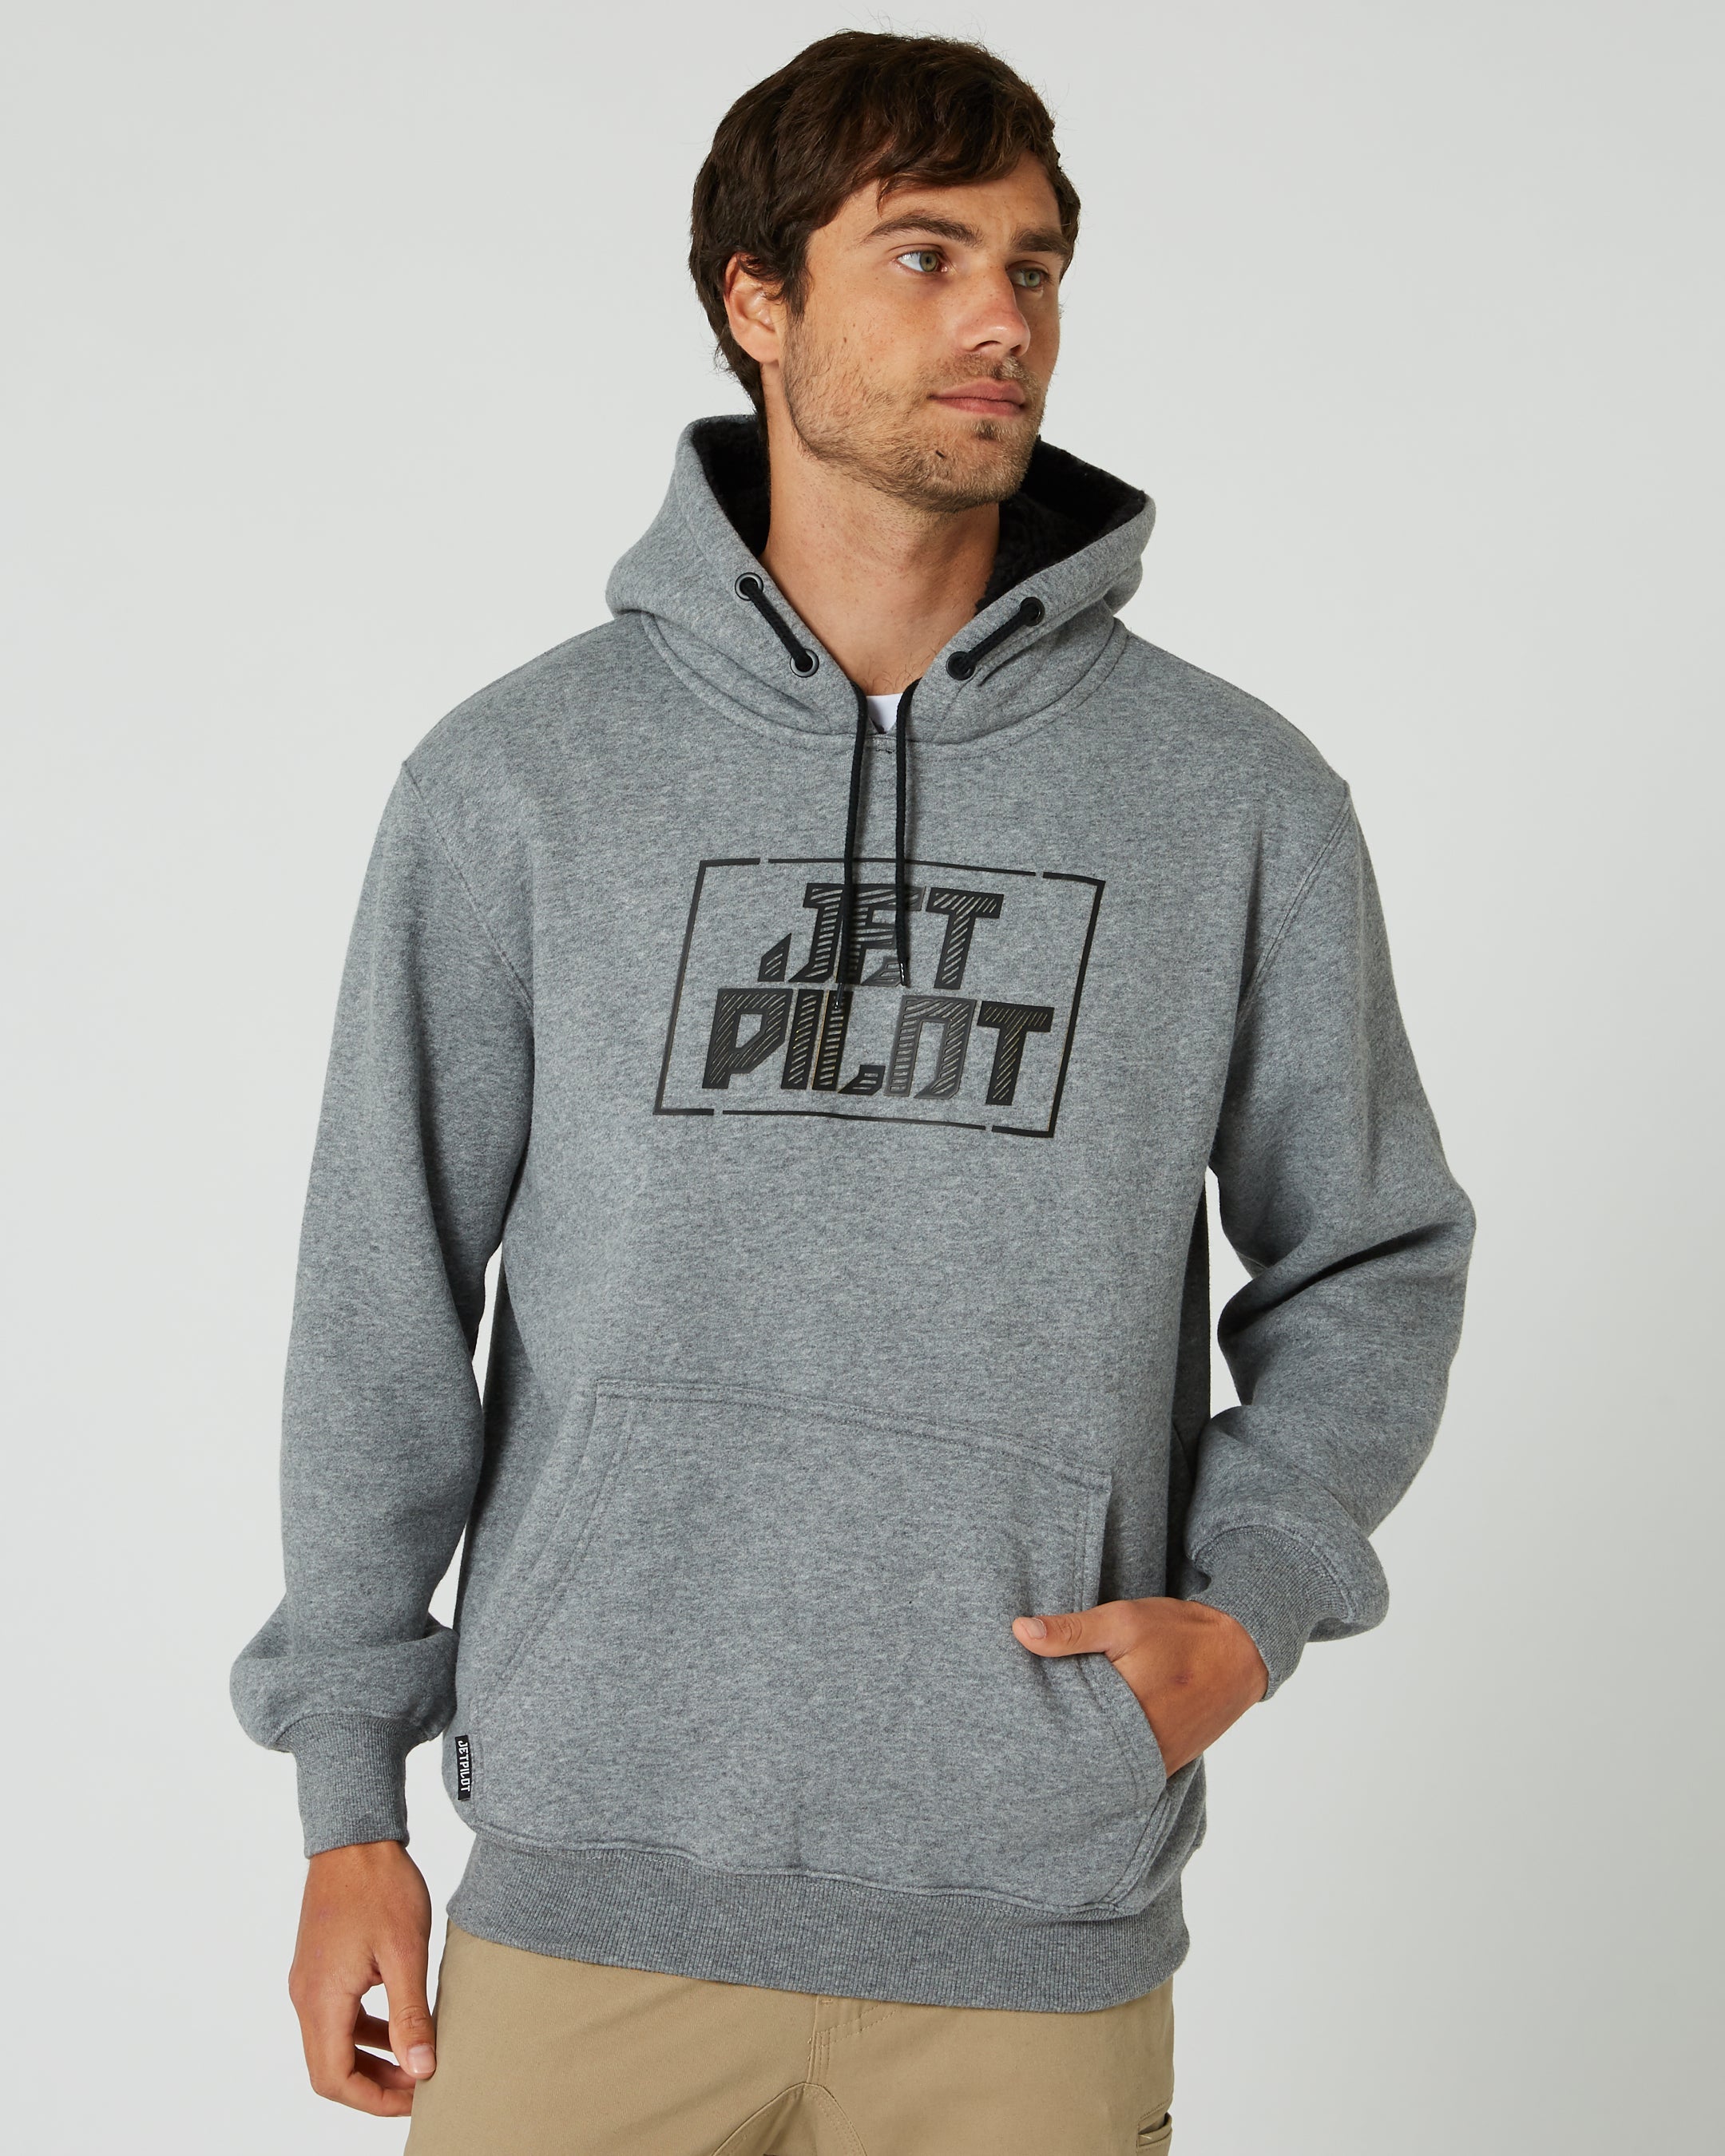 Jetpilot Corp HD Mens Pullover Hoodie - Charcoal